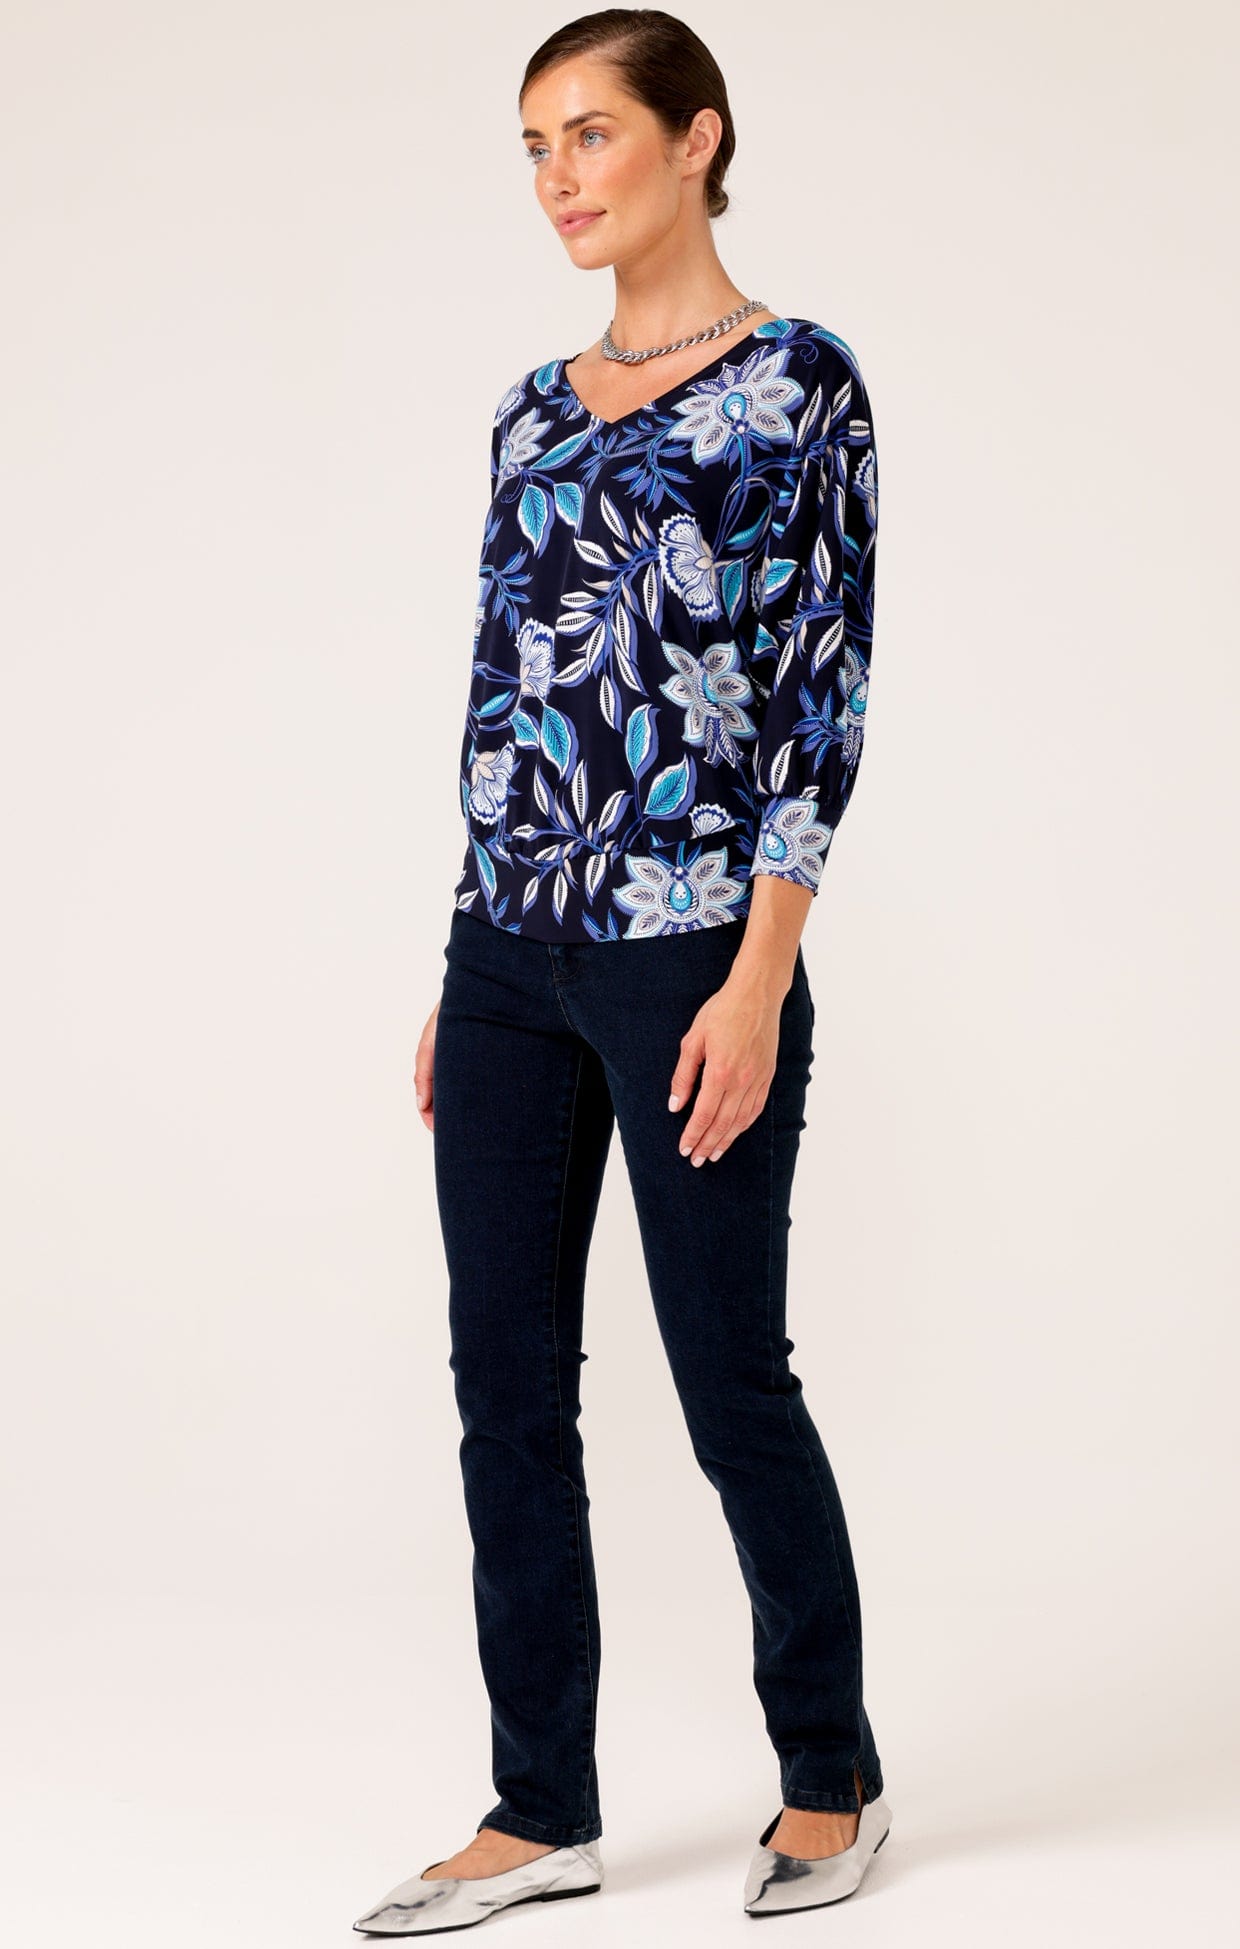 Tops Multi Occasion WILD FLOWER TOP IN BLUE PAISLEY FLORAL